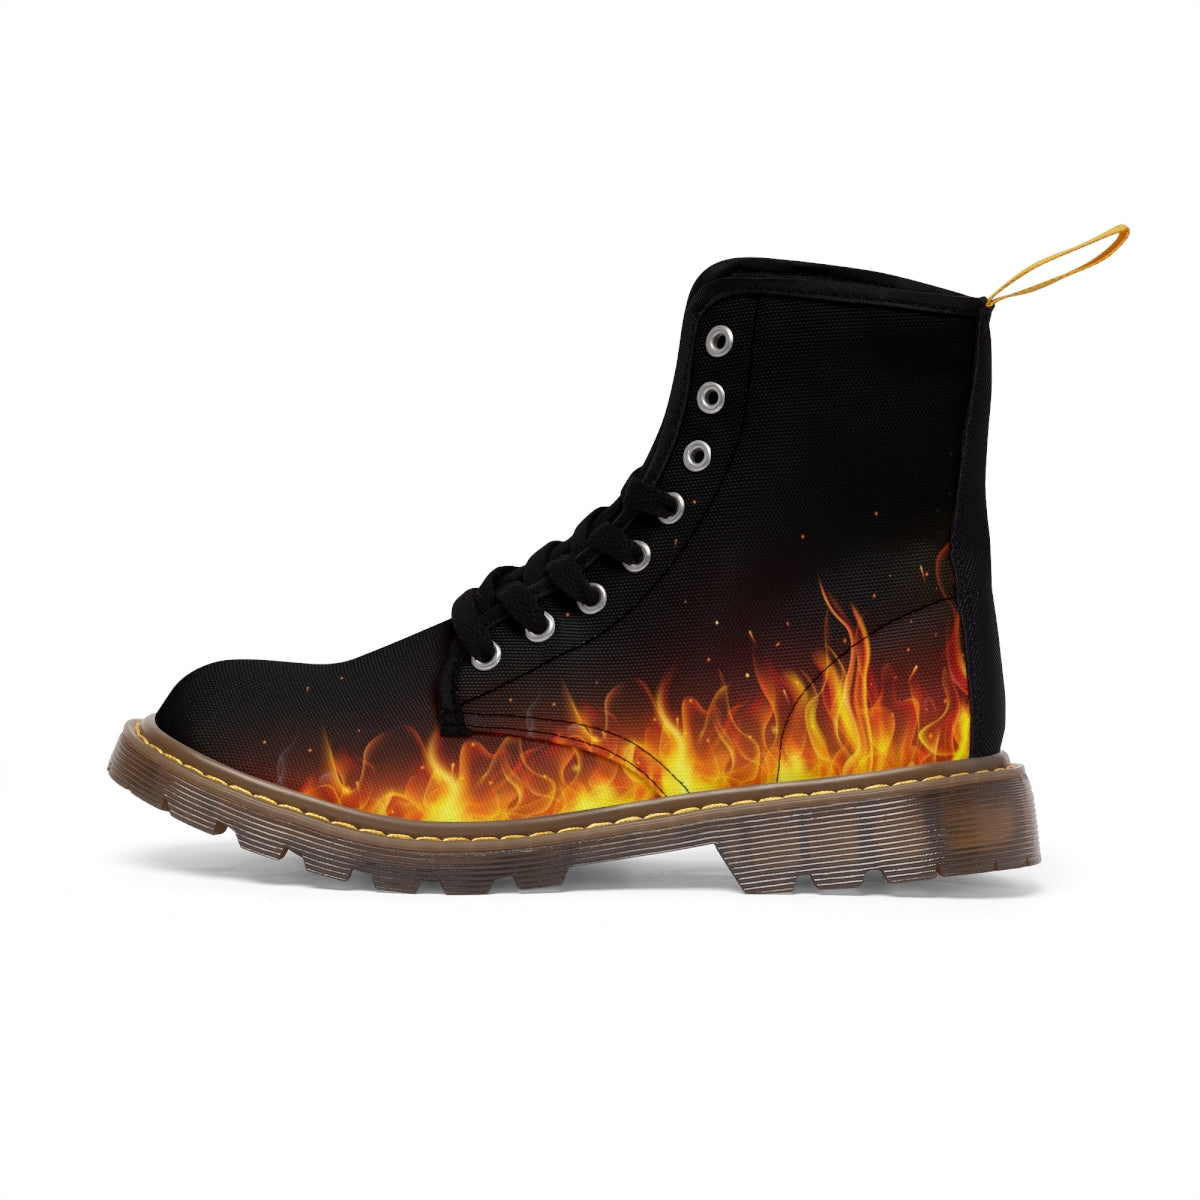 Boots on Fire - Men's Canvas Boots